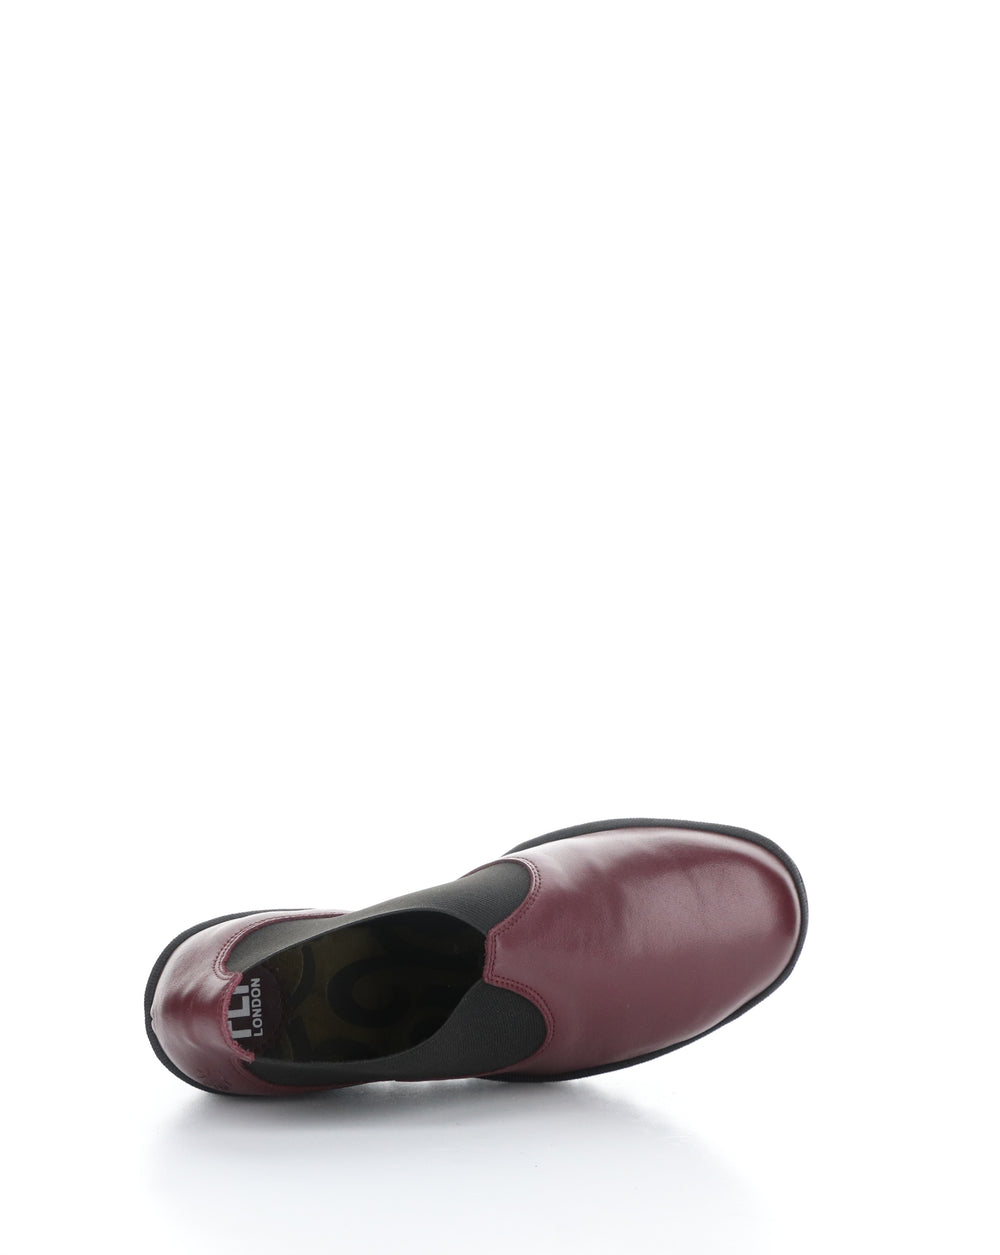 YIFY447FLY 001 WINE Round Toe Shoes